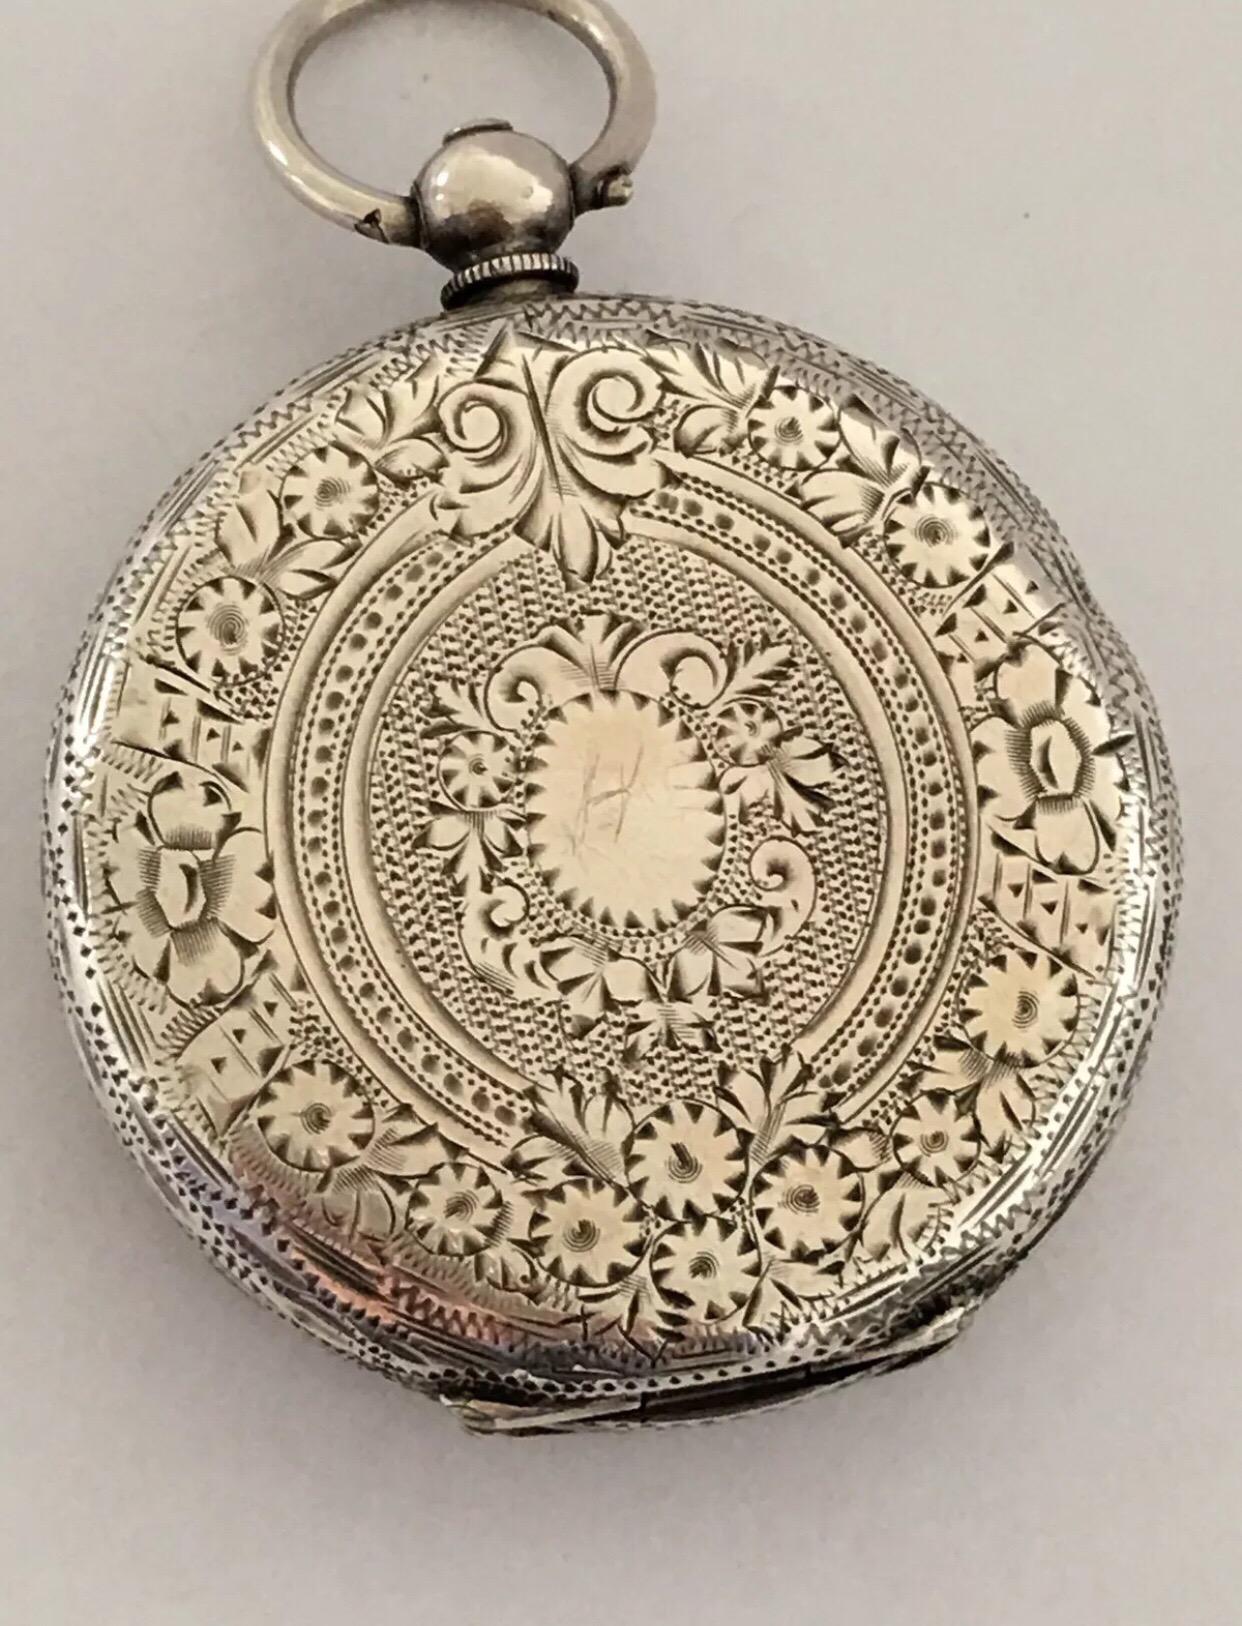 Antique Silver Yellow enamel Dial key-wind Pocket Watch.


This beautiful pocket watch is in good working condition. There is a visible dent on the right side case as shown on the photo. It comes with a key